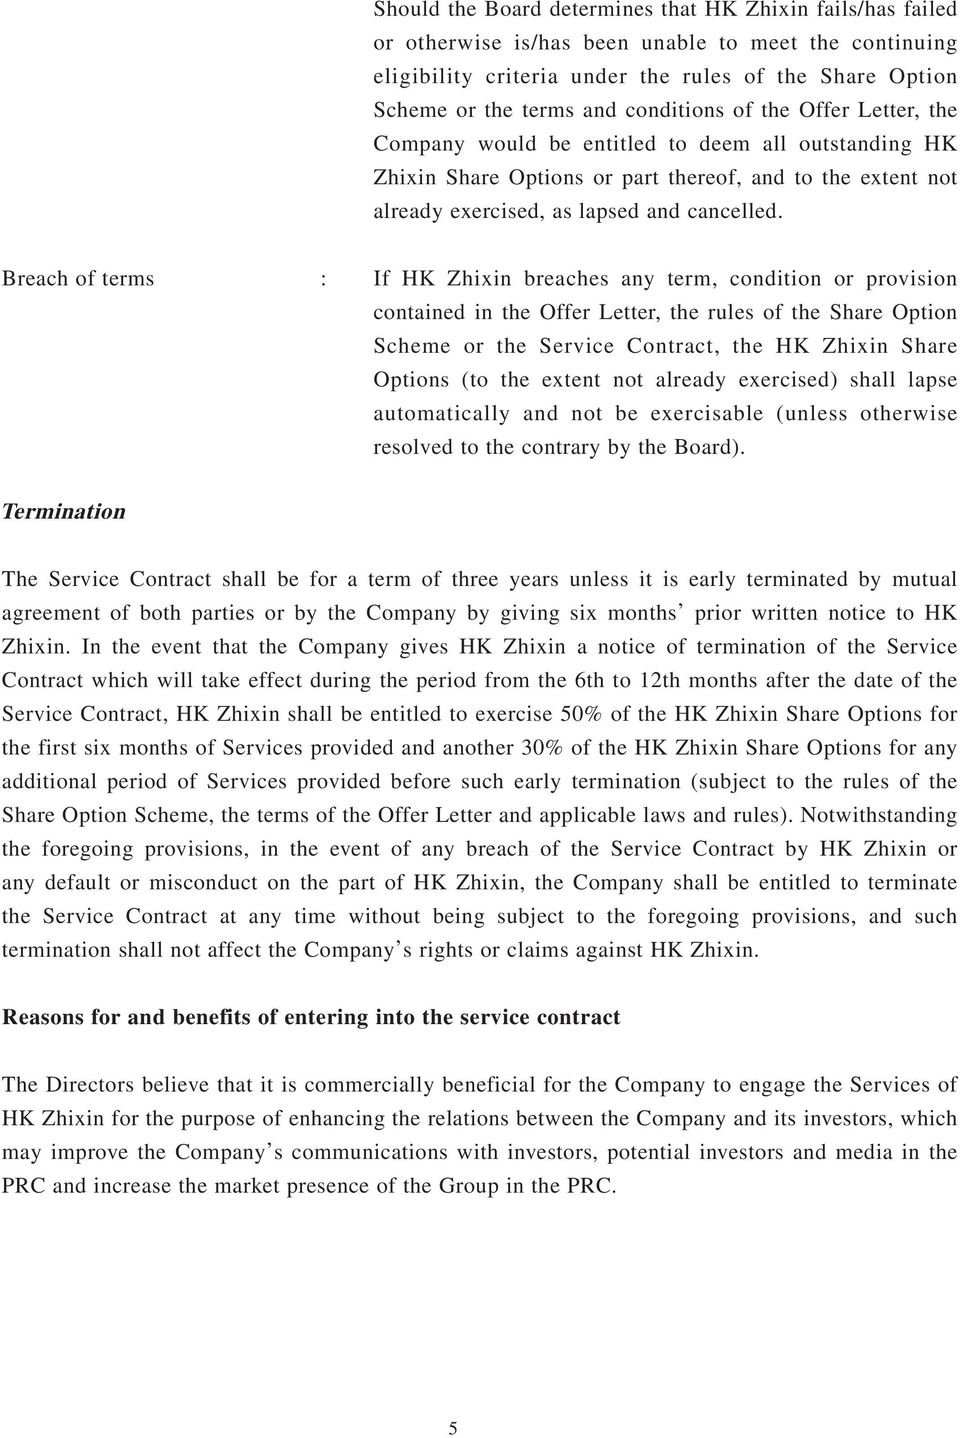 Breach of terms : If HK Zhixin breaches any term, condition or provision contained in the Offer Letter, the rules of the Share Option Scheme or the Service Contract, the HK Zhixin Share Options (to